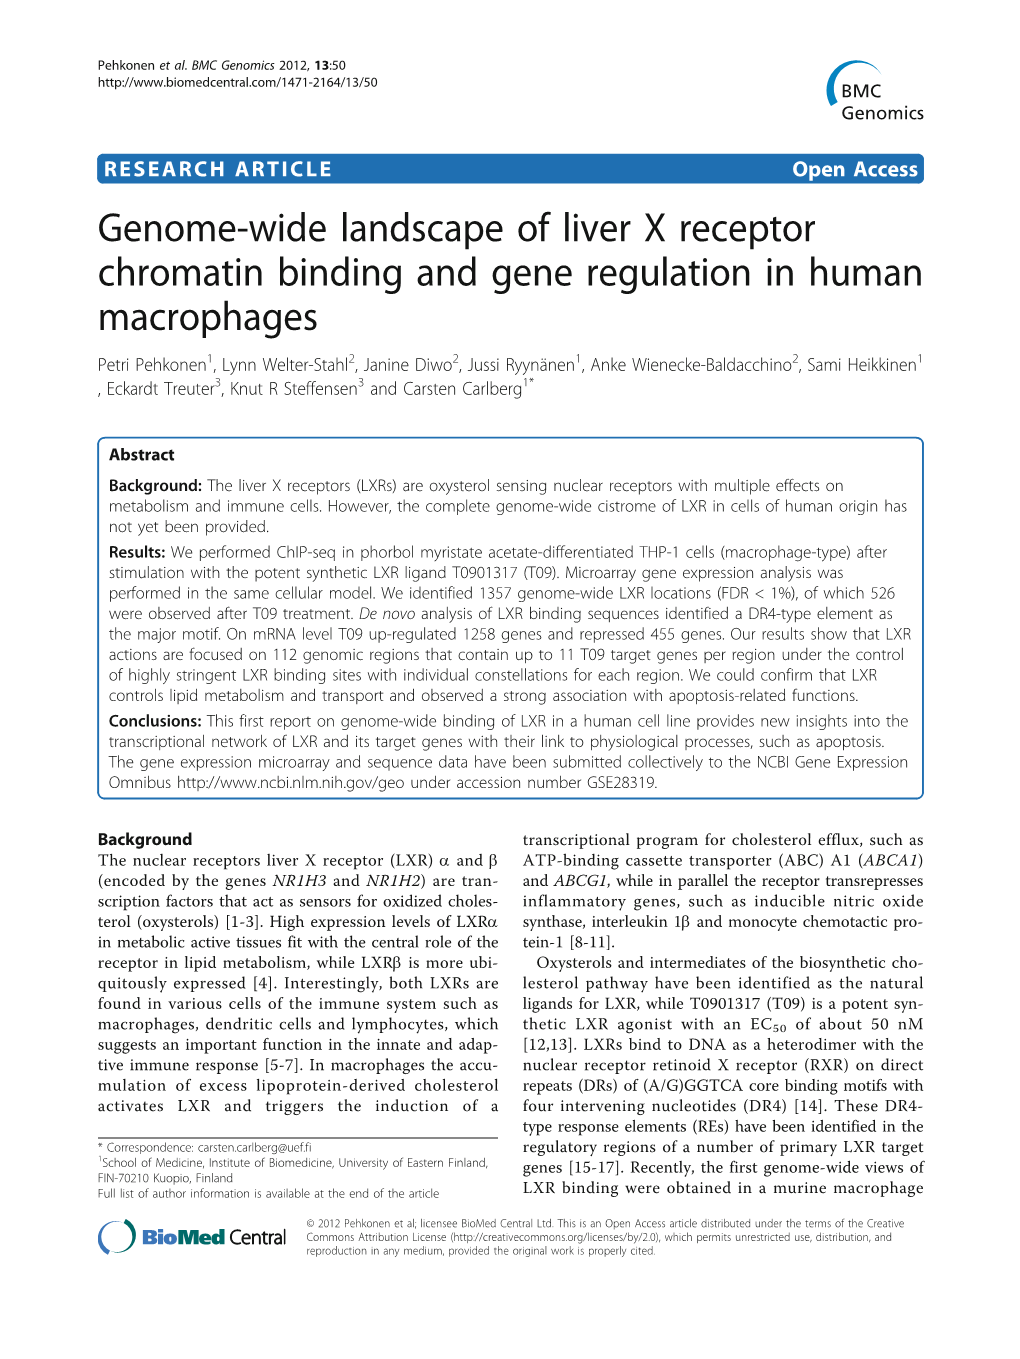 Genome-Wide Landscape of Liver X Receptor Chromatin Binding And